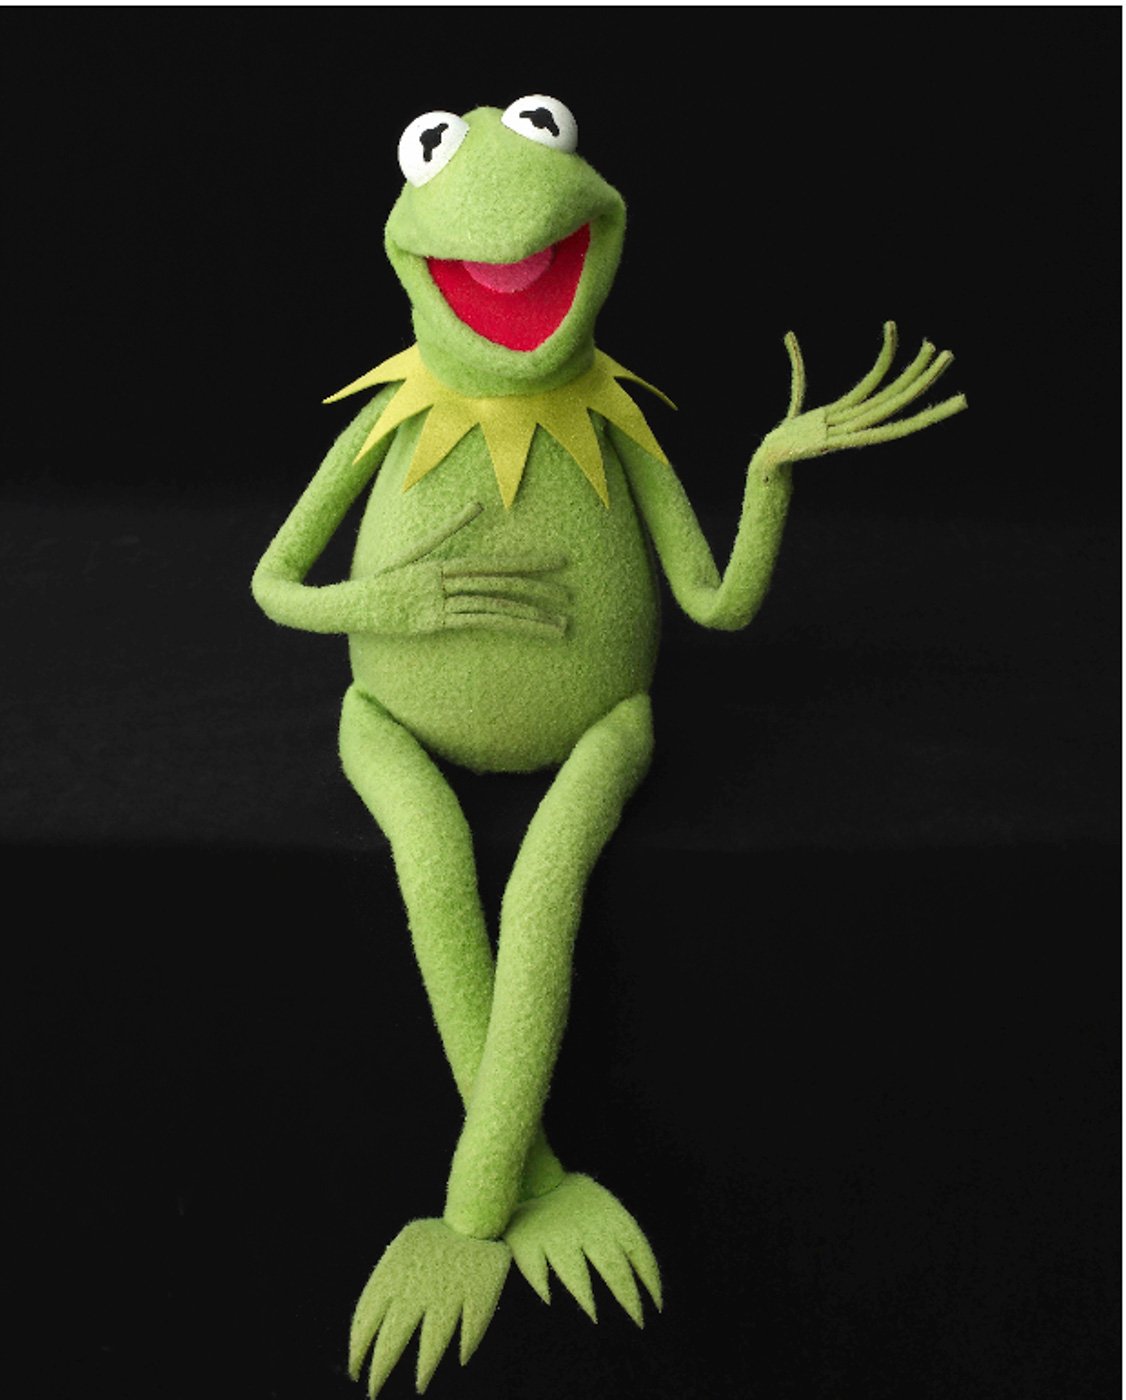 The green puppet Kermit the Frog, one hand facing upwards, smiling at camera